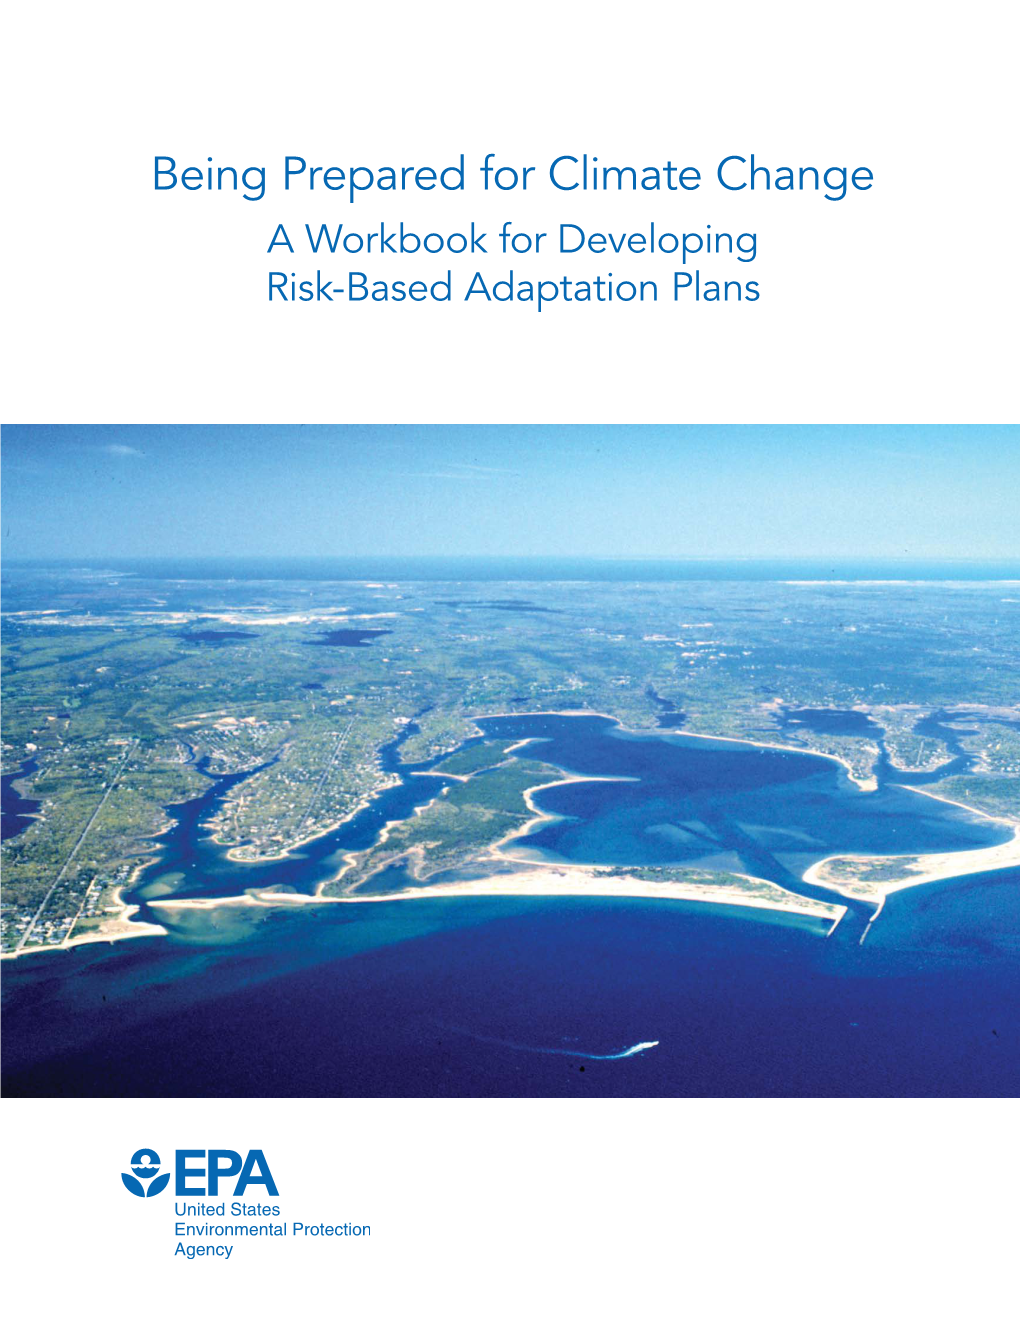 Being Prepared for Climate Change a Workbook for Developing Risk-Based Adaptation Plans Cover Photograph: Waquoit Bay National Estuarine Research Reserve